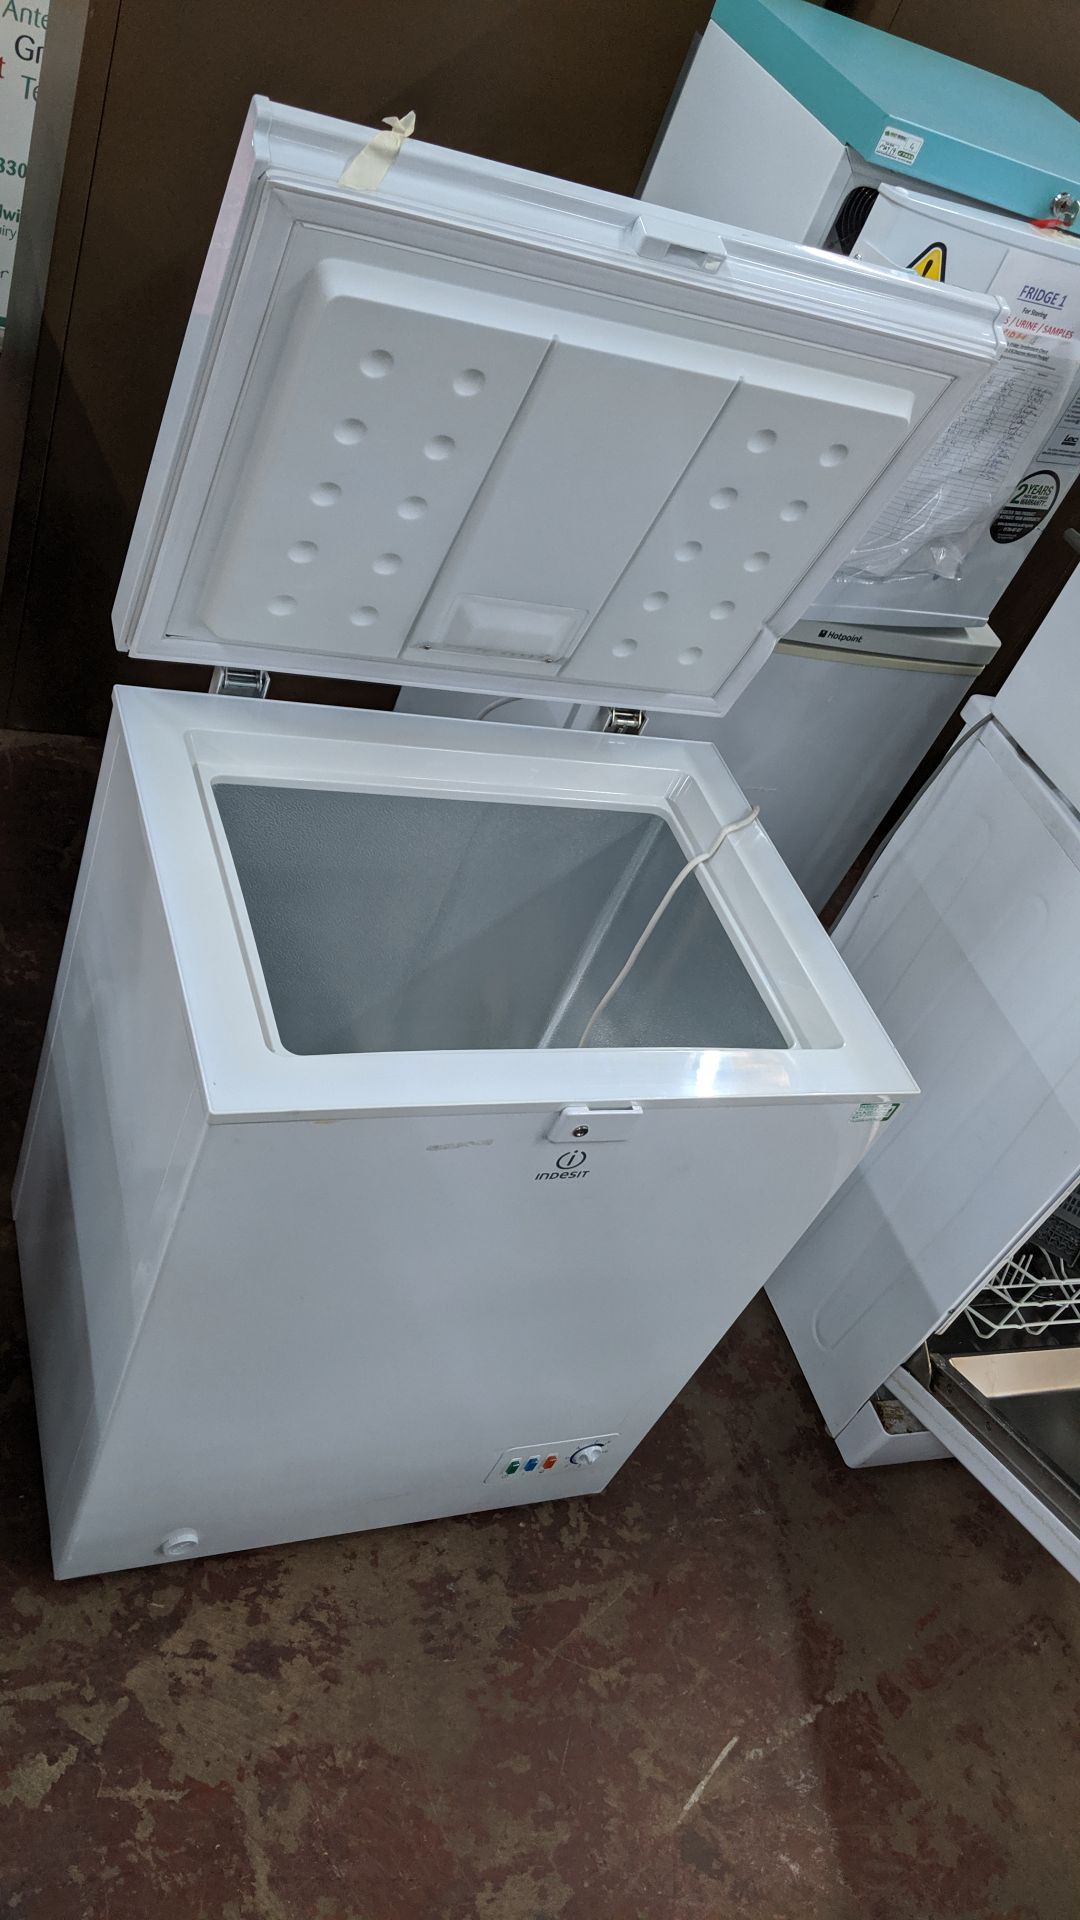 Indesit chest freezer OFIA100UK. This is one of a large number of lots used/owned by One To One ( - Image 4 of 5